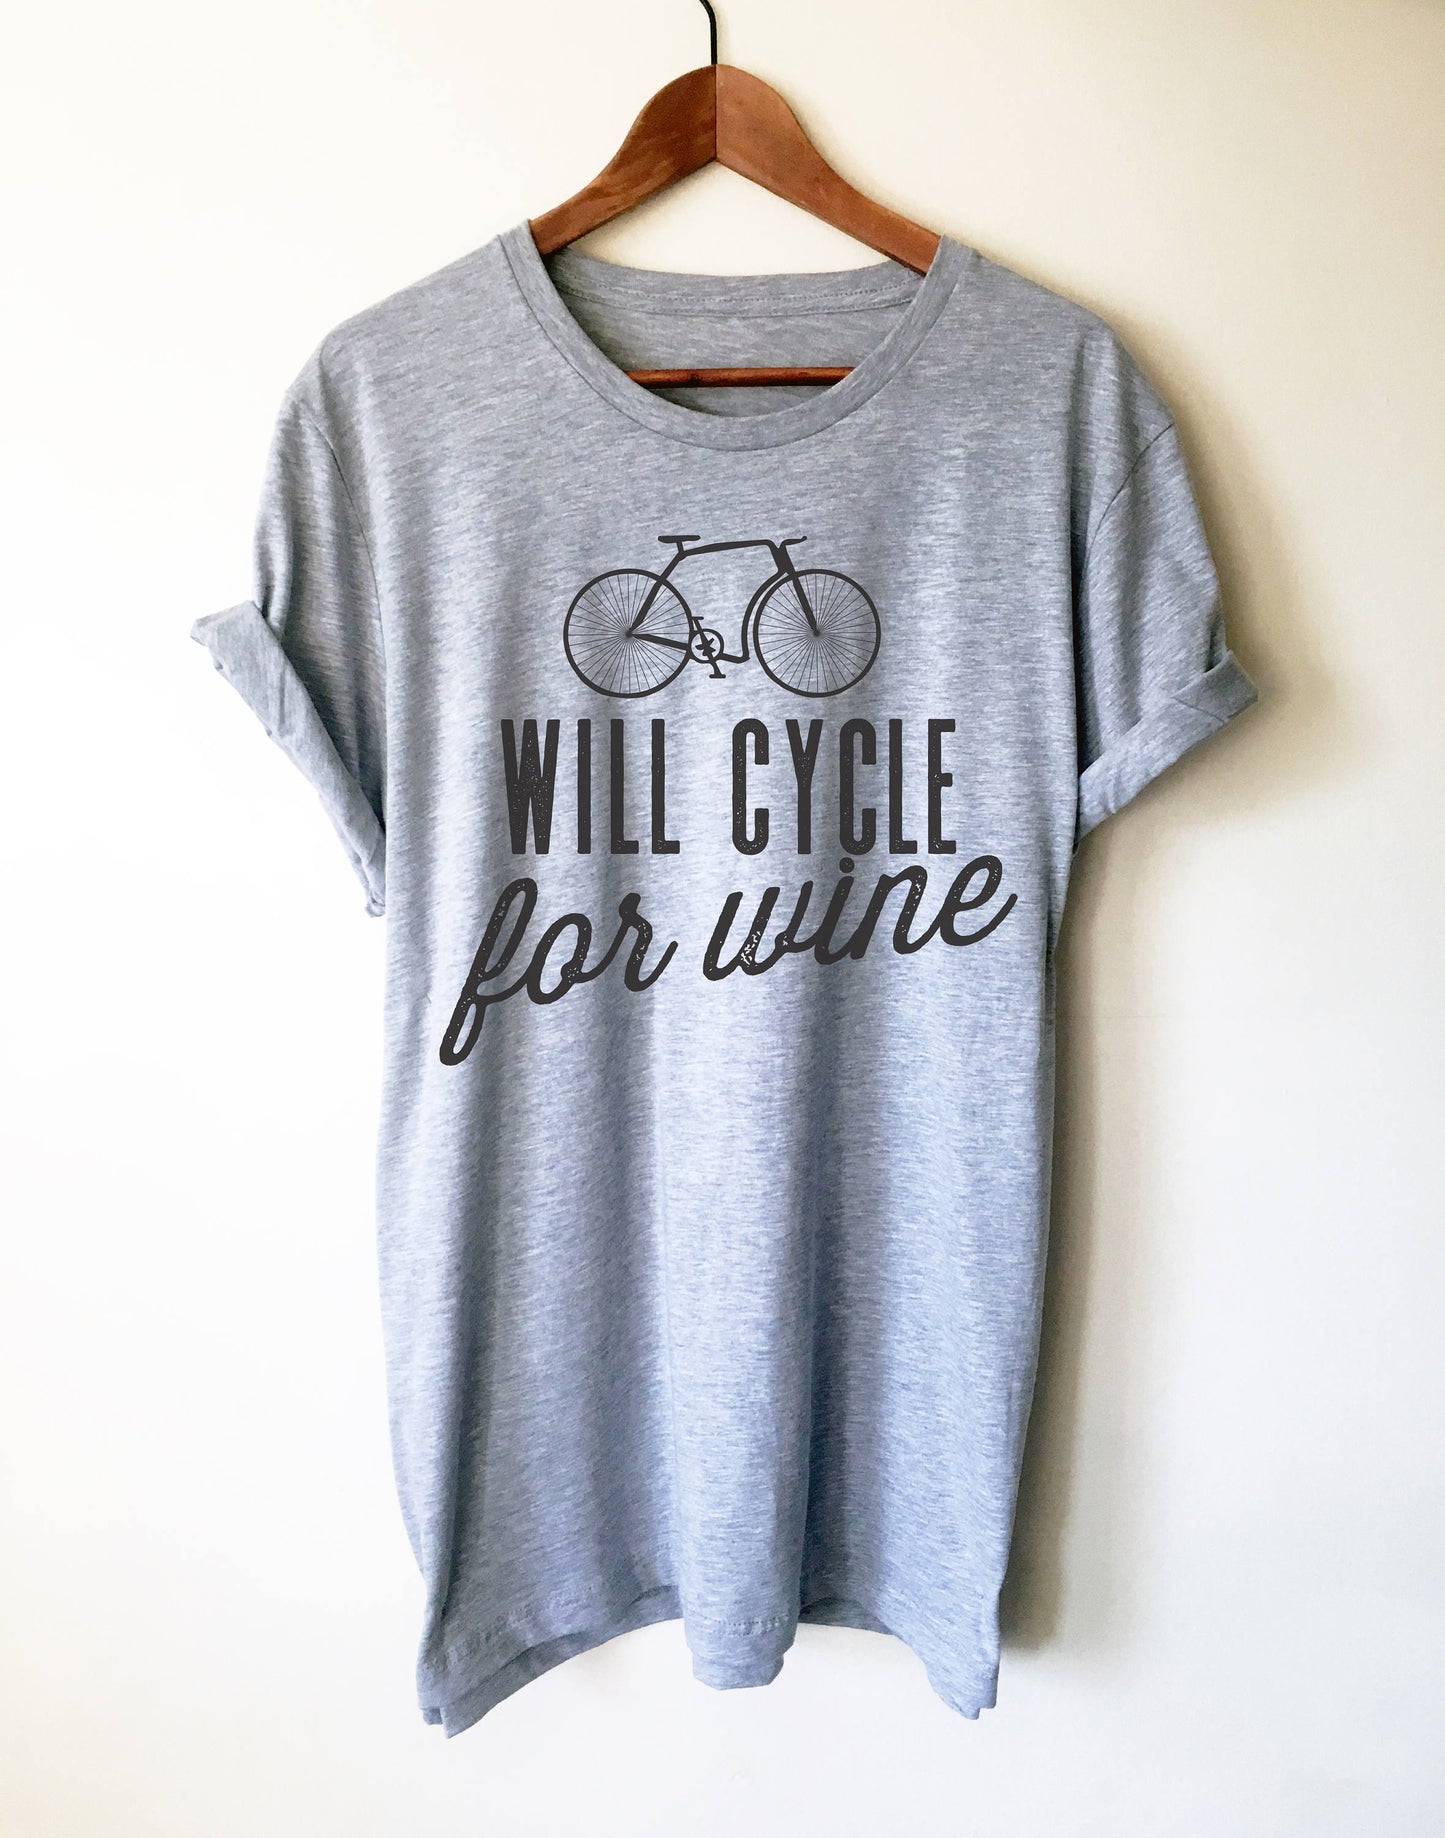 Will Cycle For Wine Unisex Shirt - Triathlon Shirt, Cycling Shirt, Cyclists Gift, Bicycle Shirt, Bicycle Tshirt, Bicycle Lover Gift